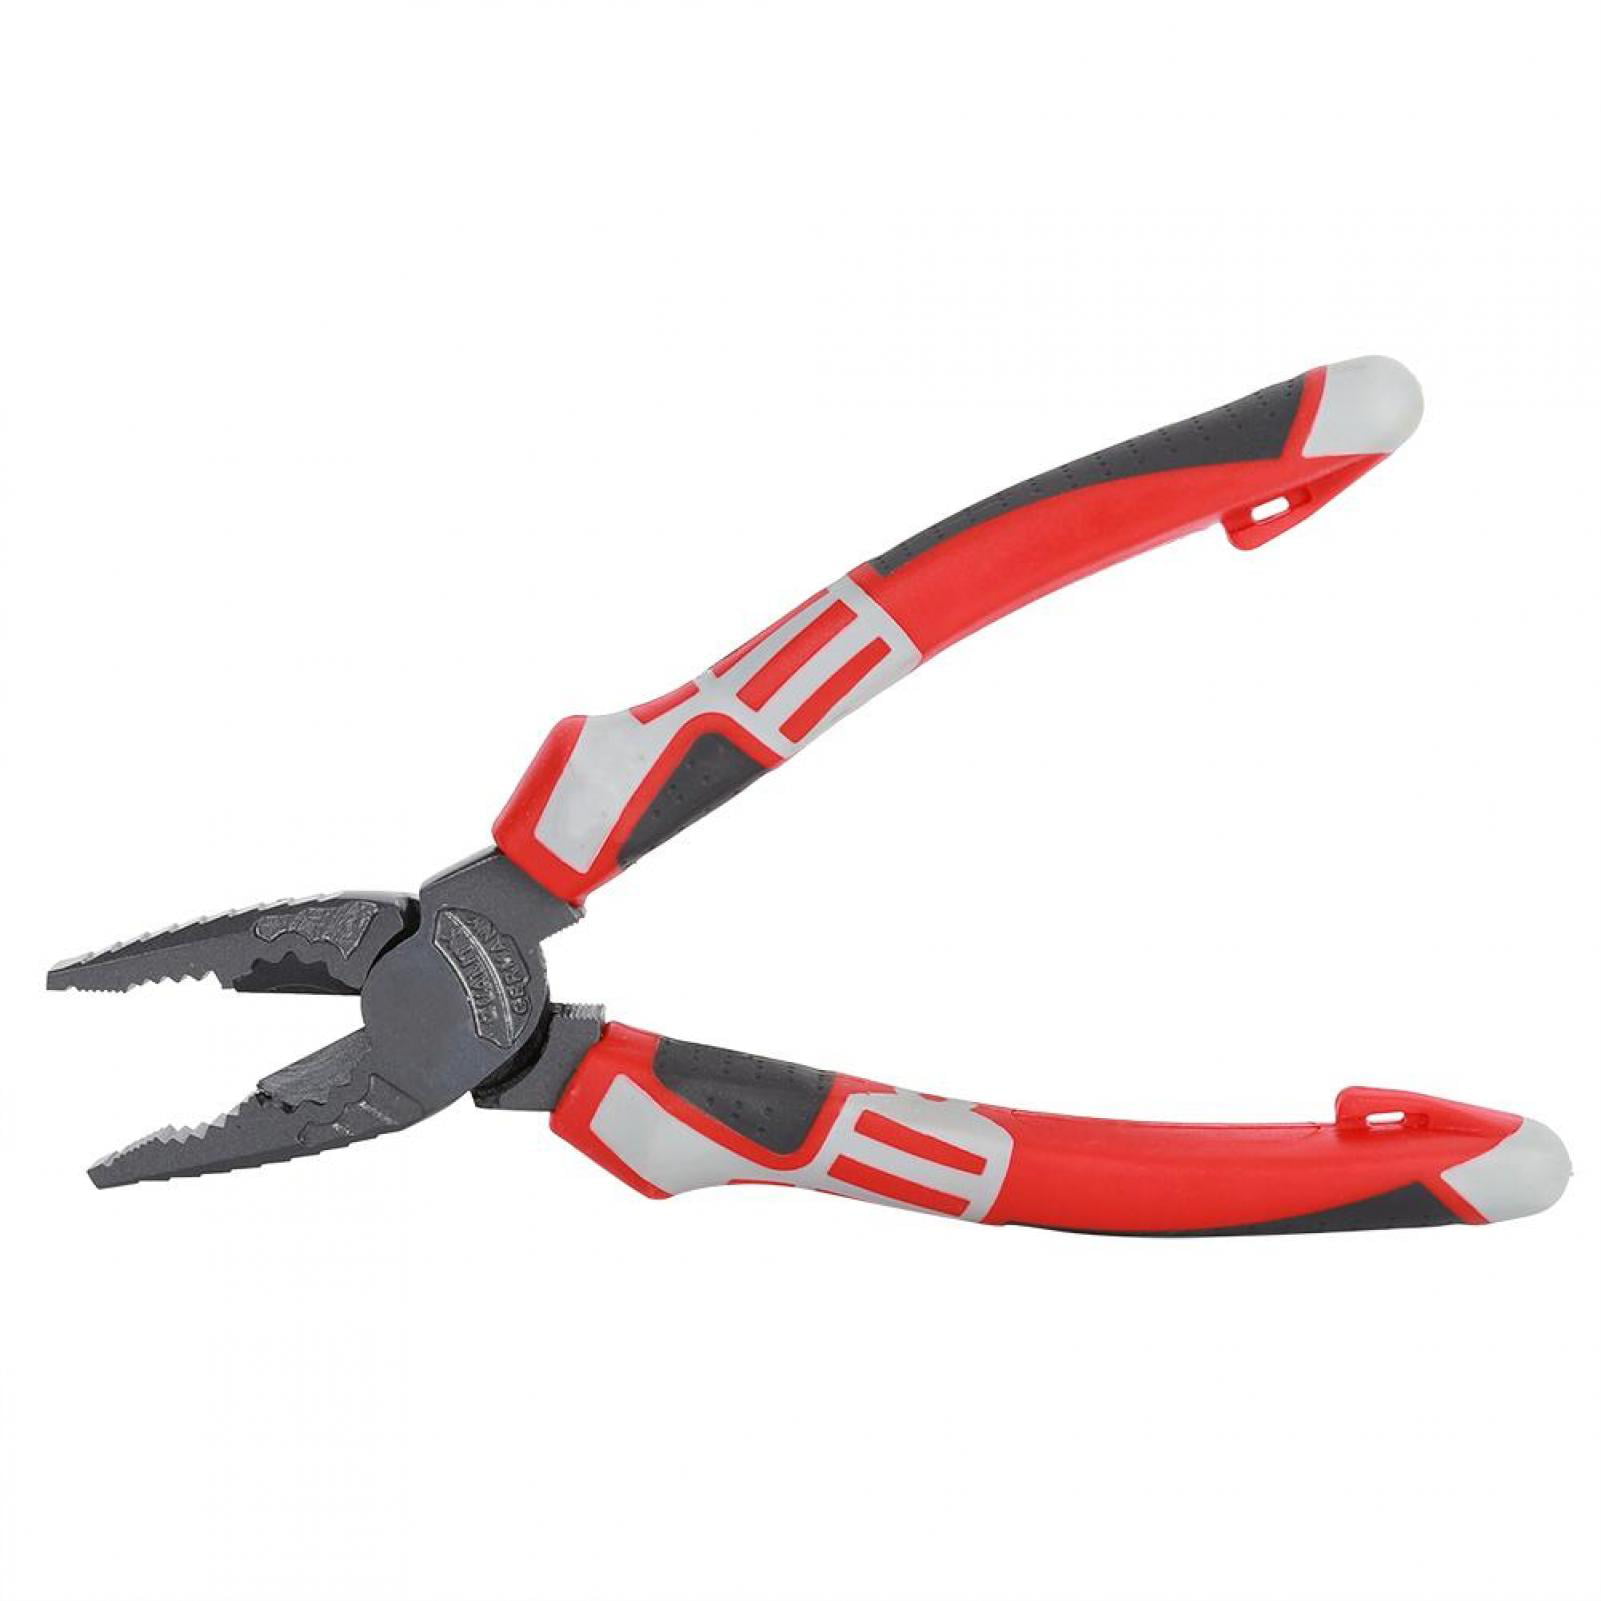 for Electricians or Household Use Cutting Hand Tools with Transparent Electrophoretic Paint Pliers 8 inch Wire Stripper Cable Cutters Multi‑Functional German Electrician Pliers